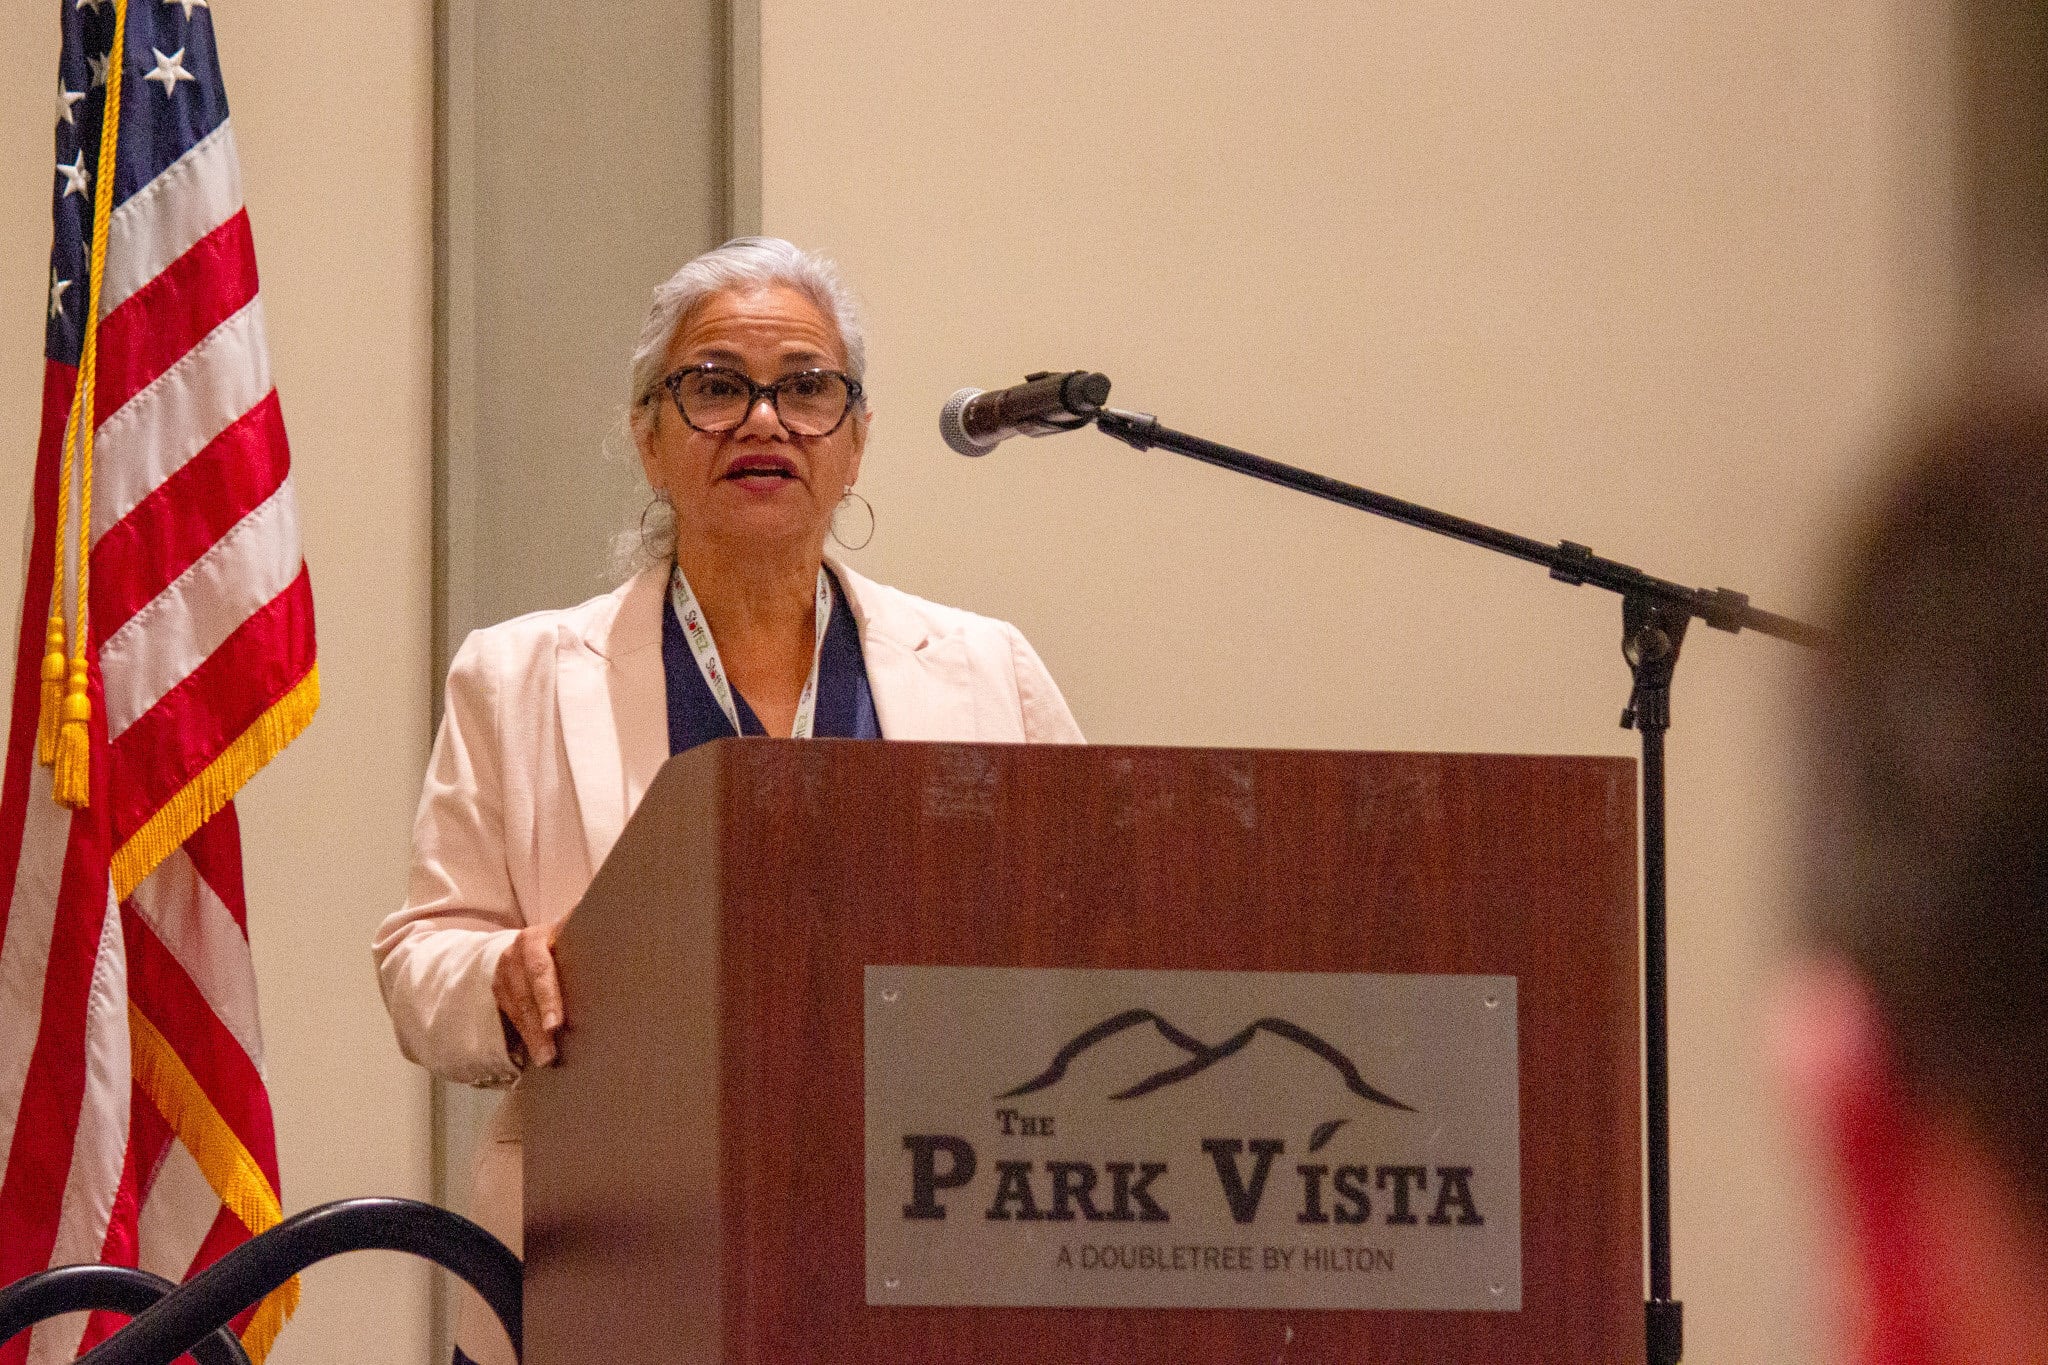 A woman wearing a white jacket and glasses standing behind a podium labeled “The Park Vista”